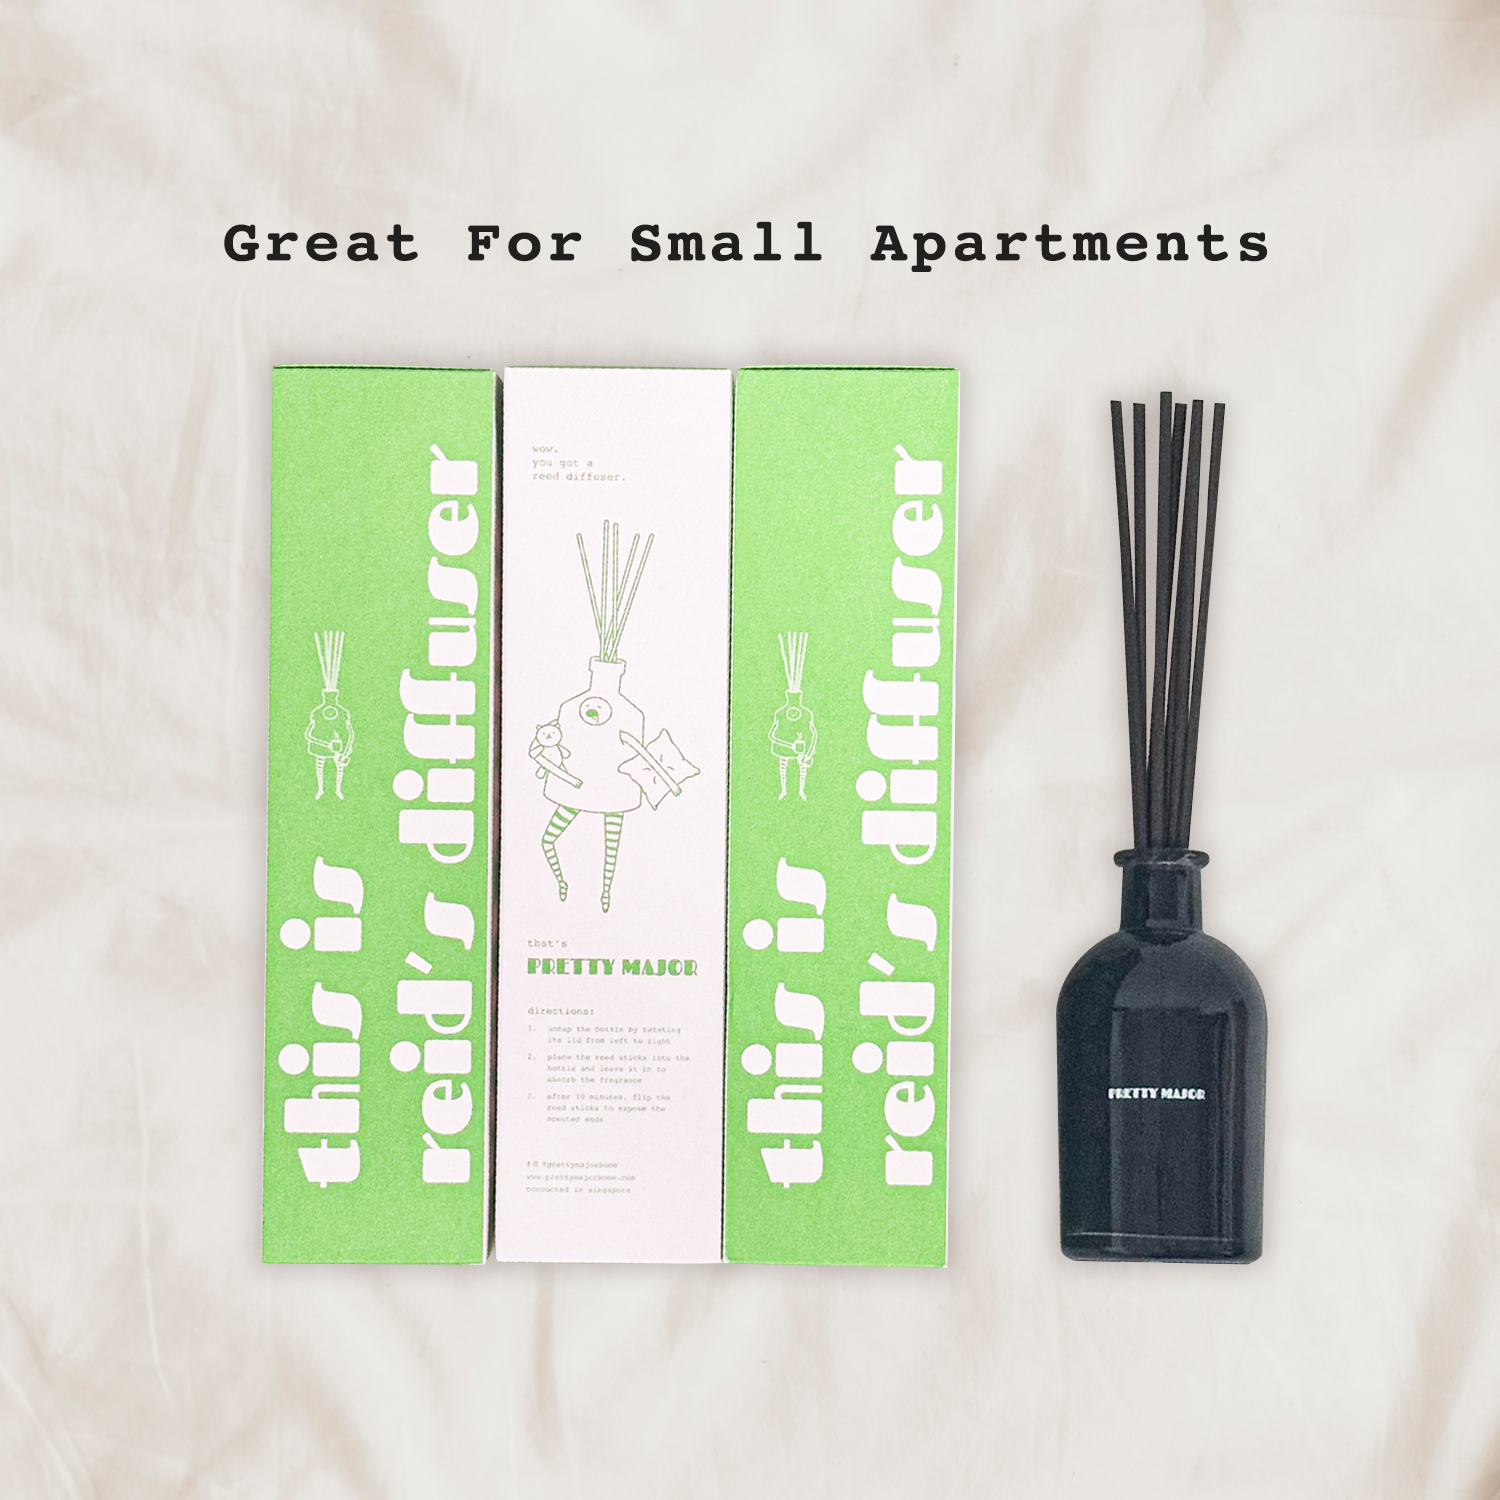 3 room reed diffuser subscription for small apartments